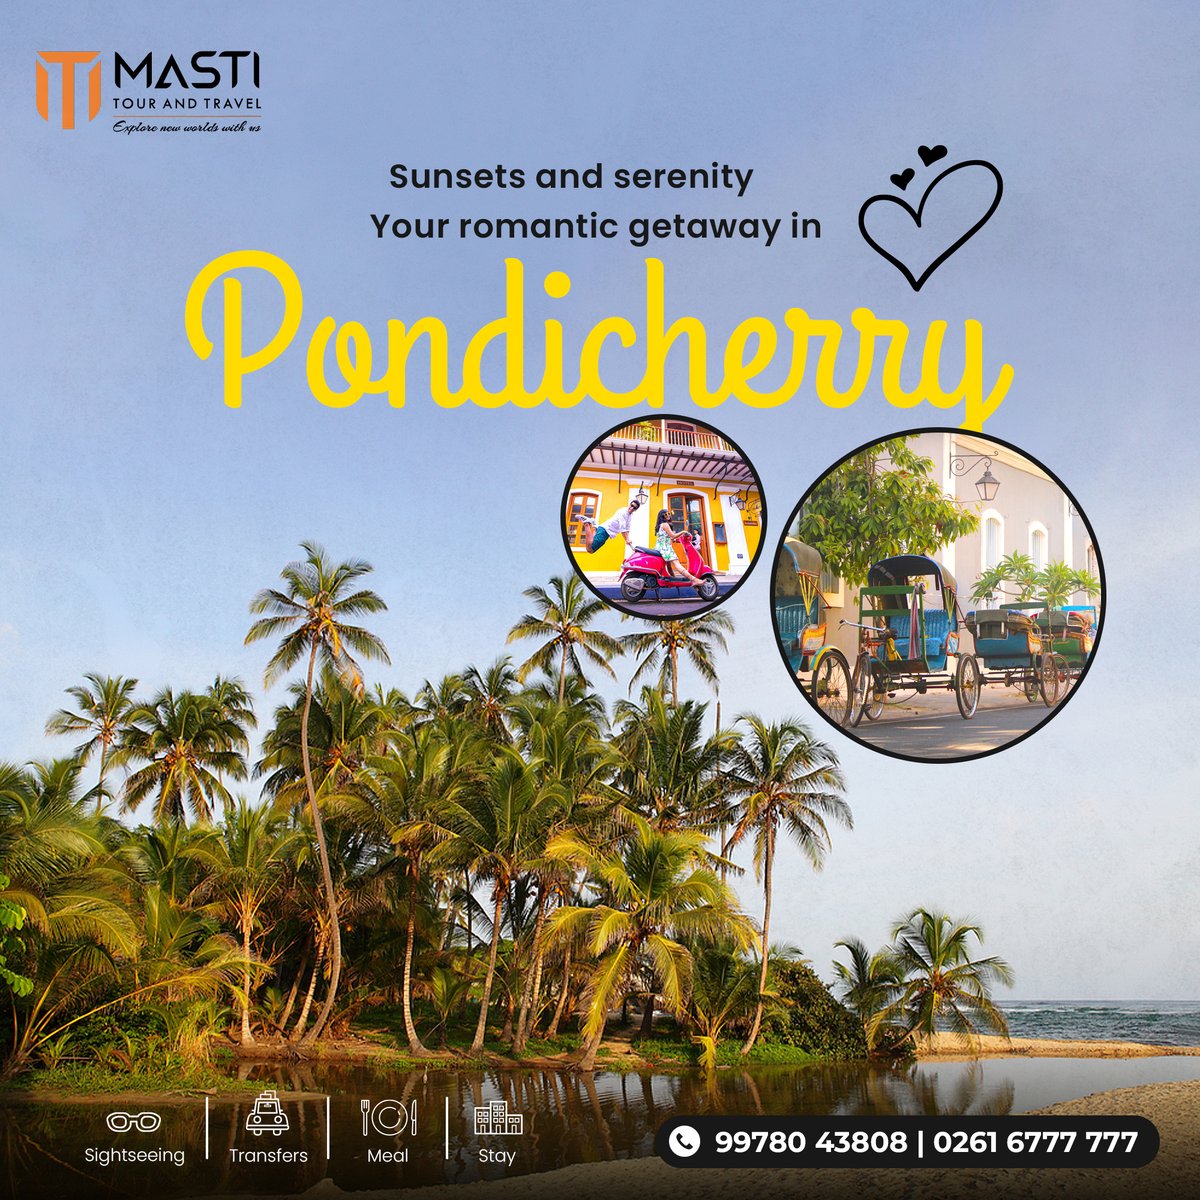 Escape to the romantic charm of Pondicherry with your special someone 
Plan your couple's retreat today
📞0261 6777 777

#pondicherry #pondicherryresorts #pondicherrycity  #beach #pondicherrybeach #pondicherrydiaries #travelretreart #honeymoon #honeymoonpackage  #mastitour